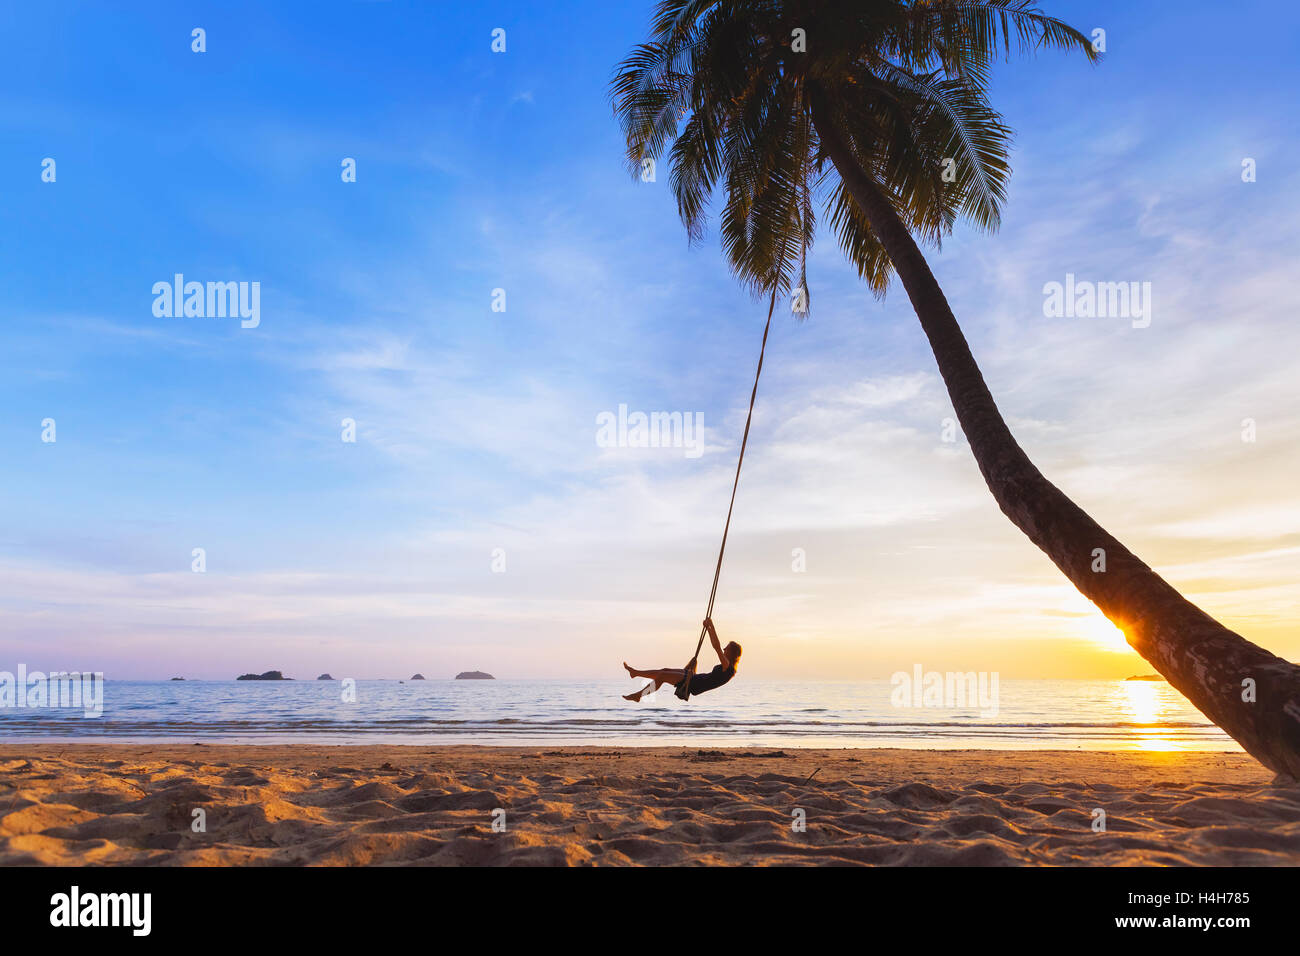 Young happy woman relaxing on a swing attached to a palm tree on a paradise beach at sunset while on vacation in tropics Stock Photo